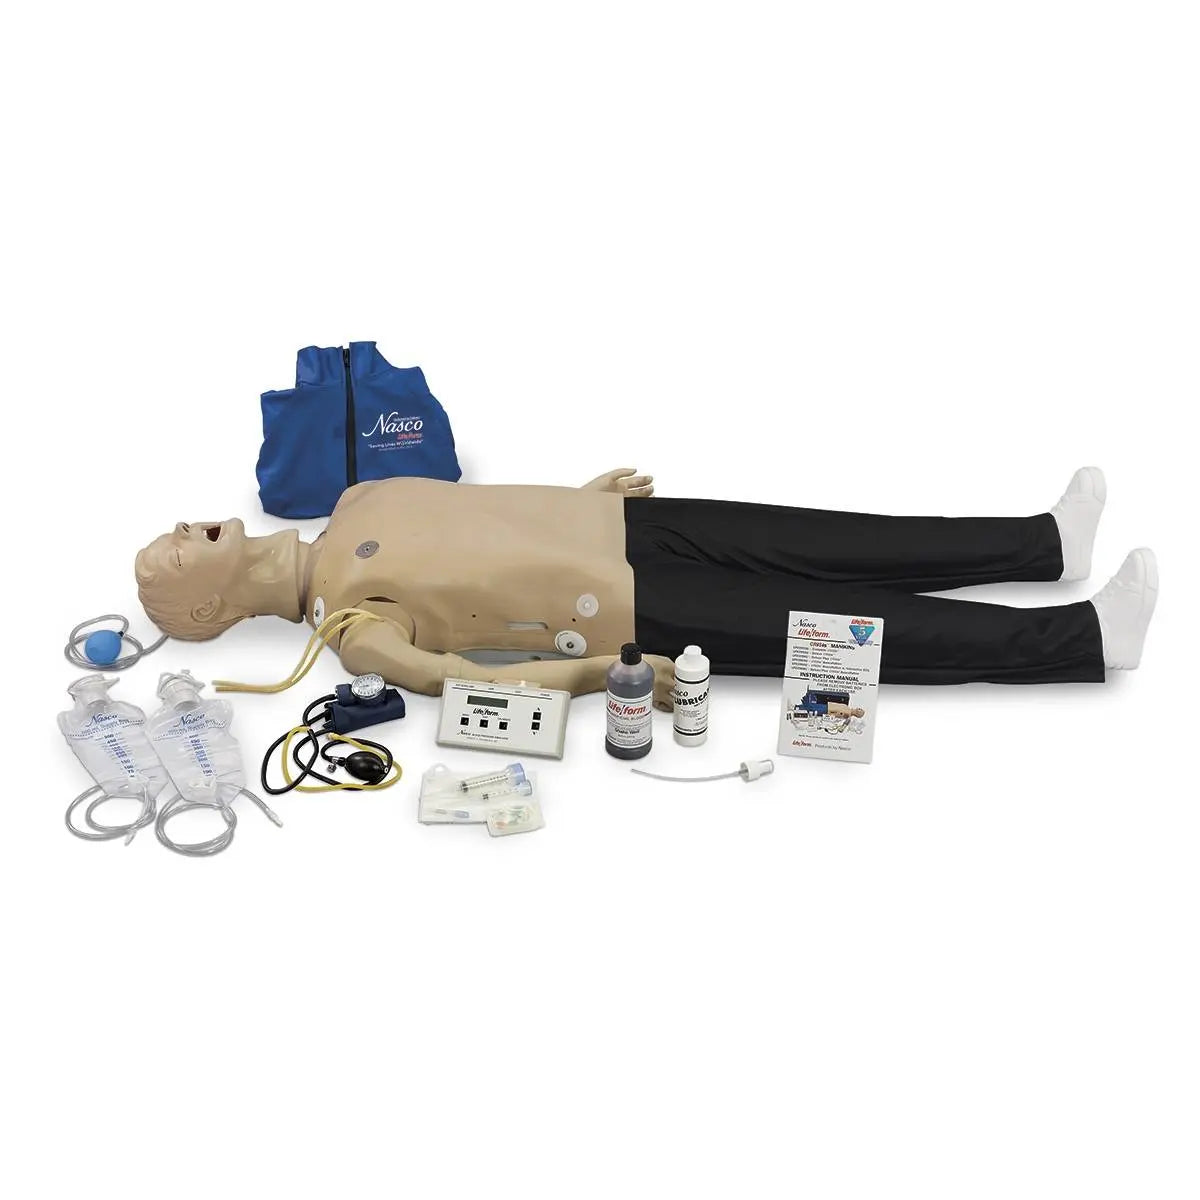 Complete Adult Crisis Manikin - First Aid Market